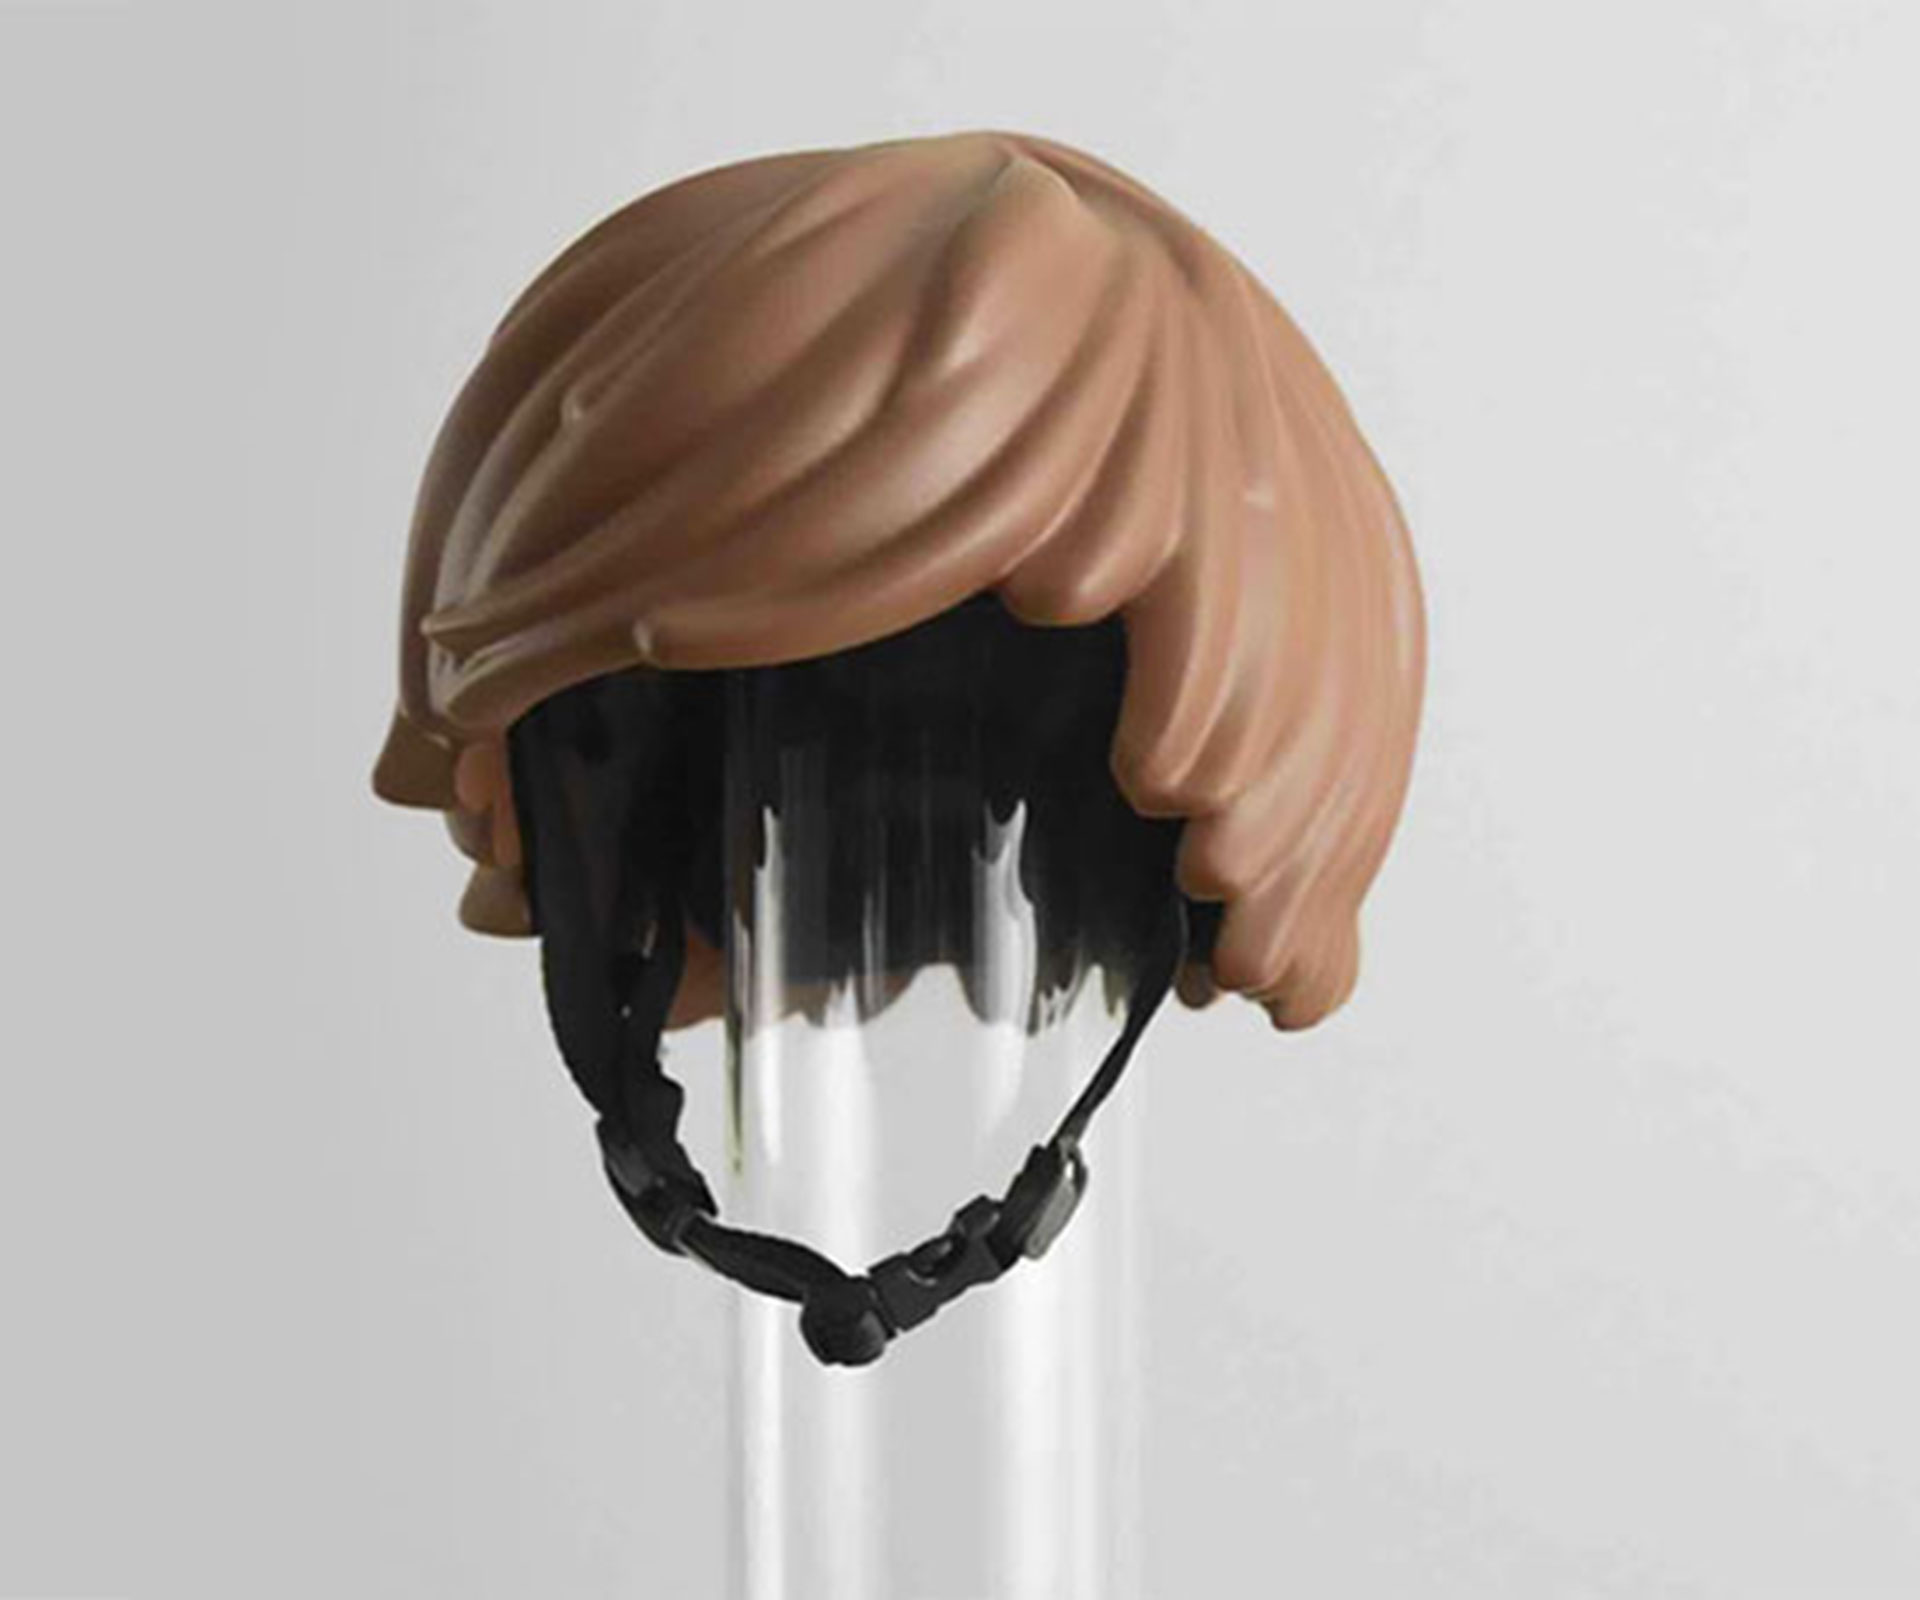 This LEGO hair bike helmet might be the best invention ever